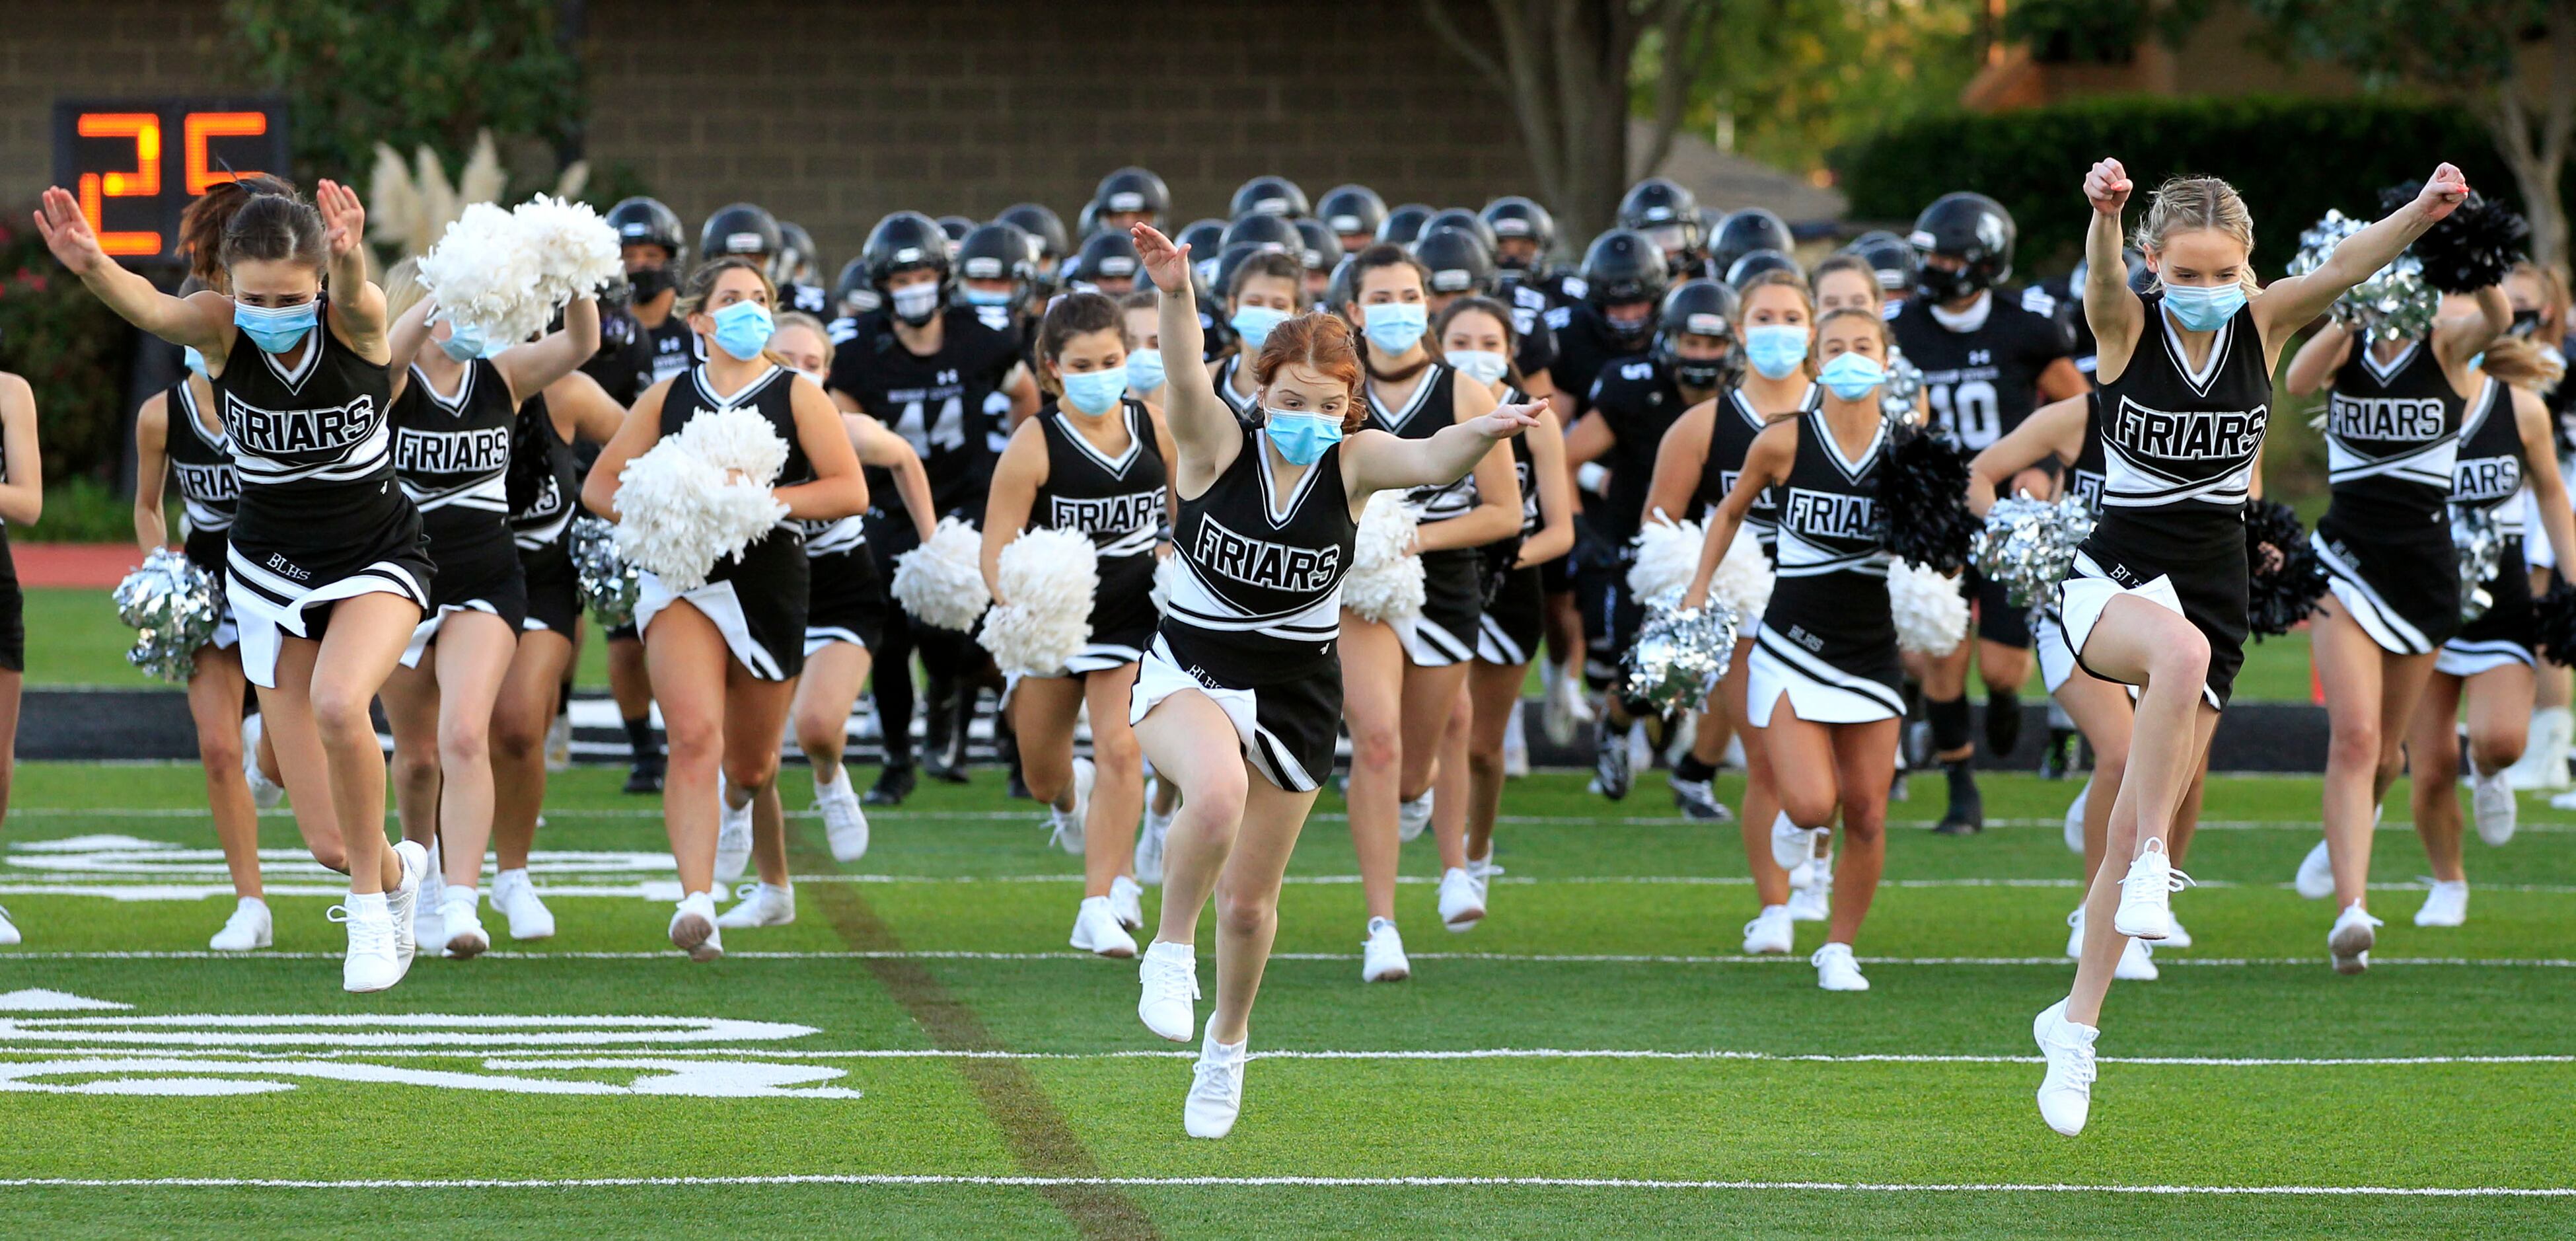 The Bishop Lynch team and cheerleaders run onto the field before the start of the first half...